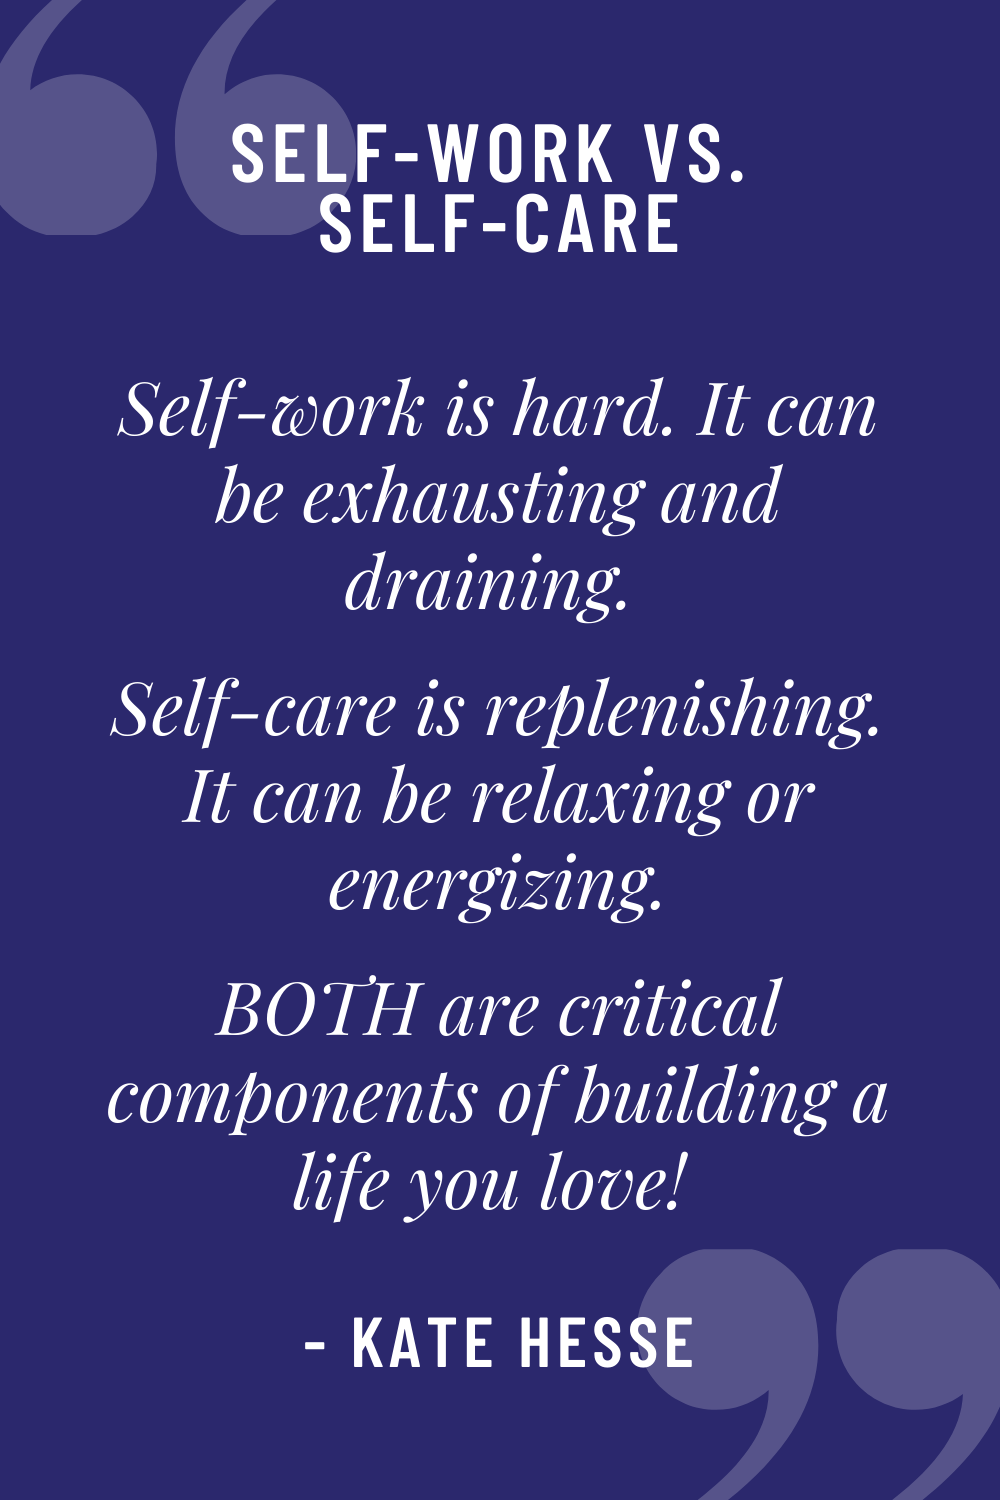 Self-work is hard. It can be exhausting and draining. Self-care is replenishing. It can be relaxing or energizing. BOTH are critical components of building a life you love!